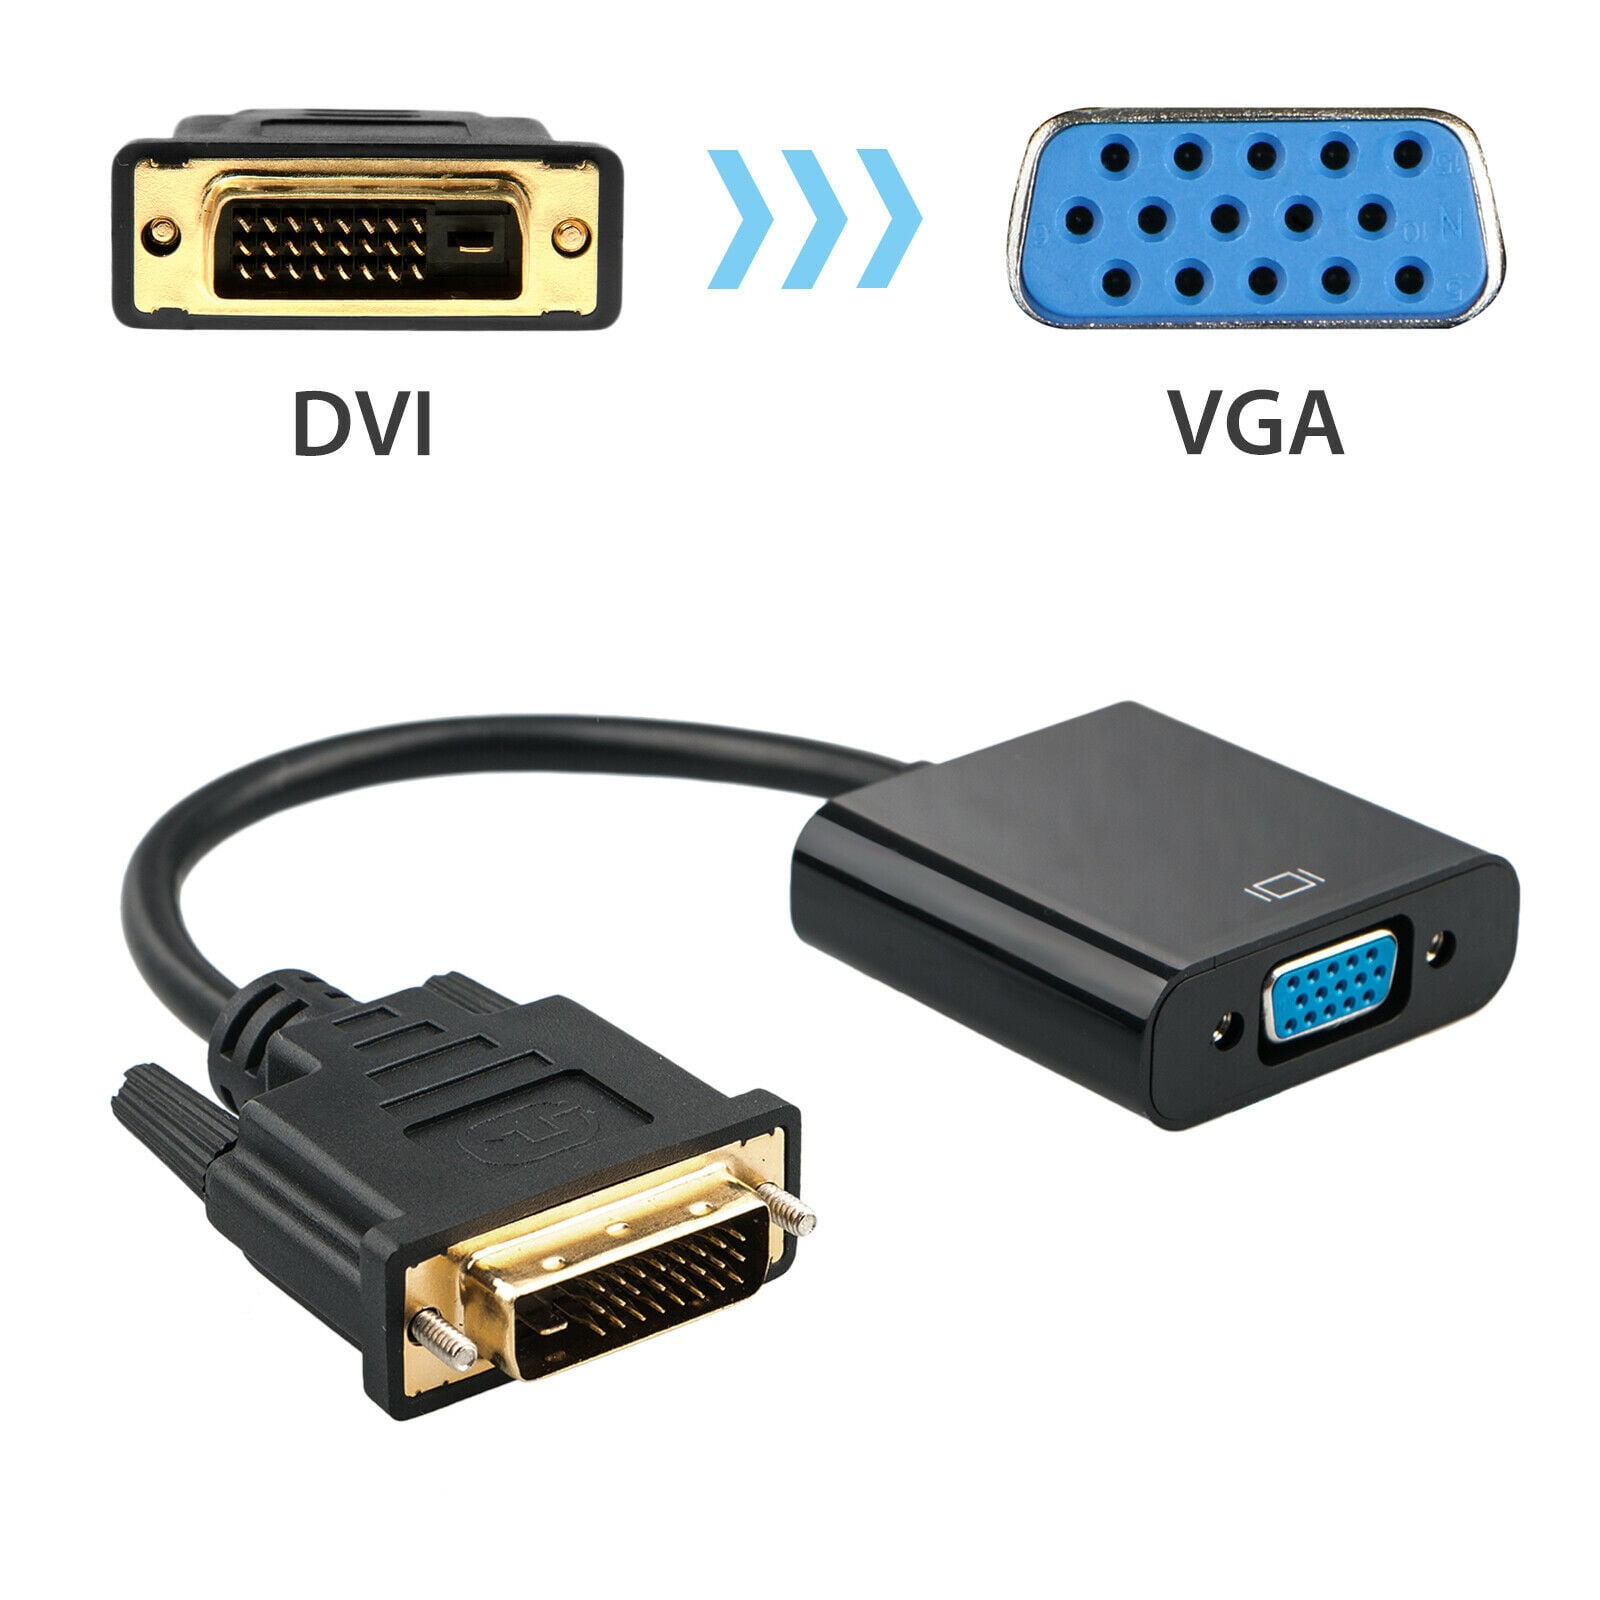 Short/Long GOLD DVI-D Male to Male 25pin 24+1 DVI Digital Video PC Monitor Cable 